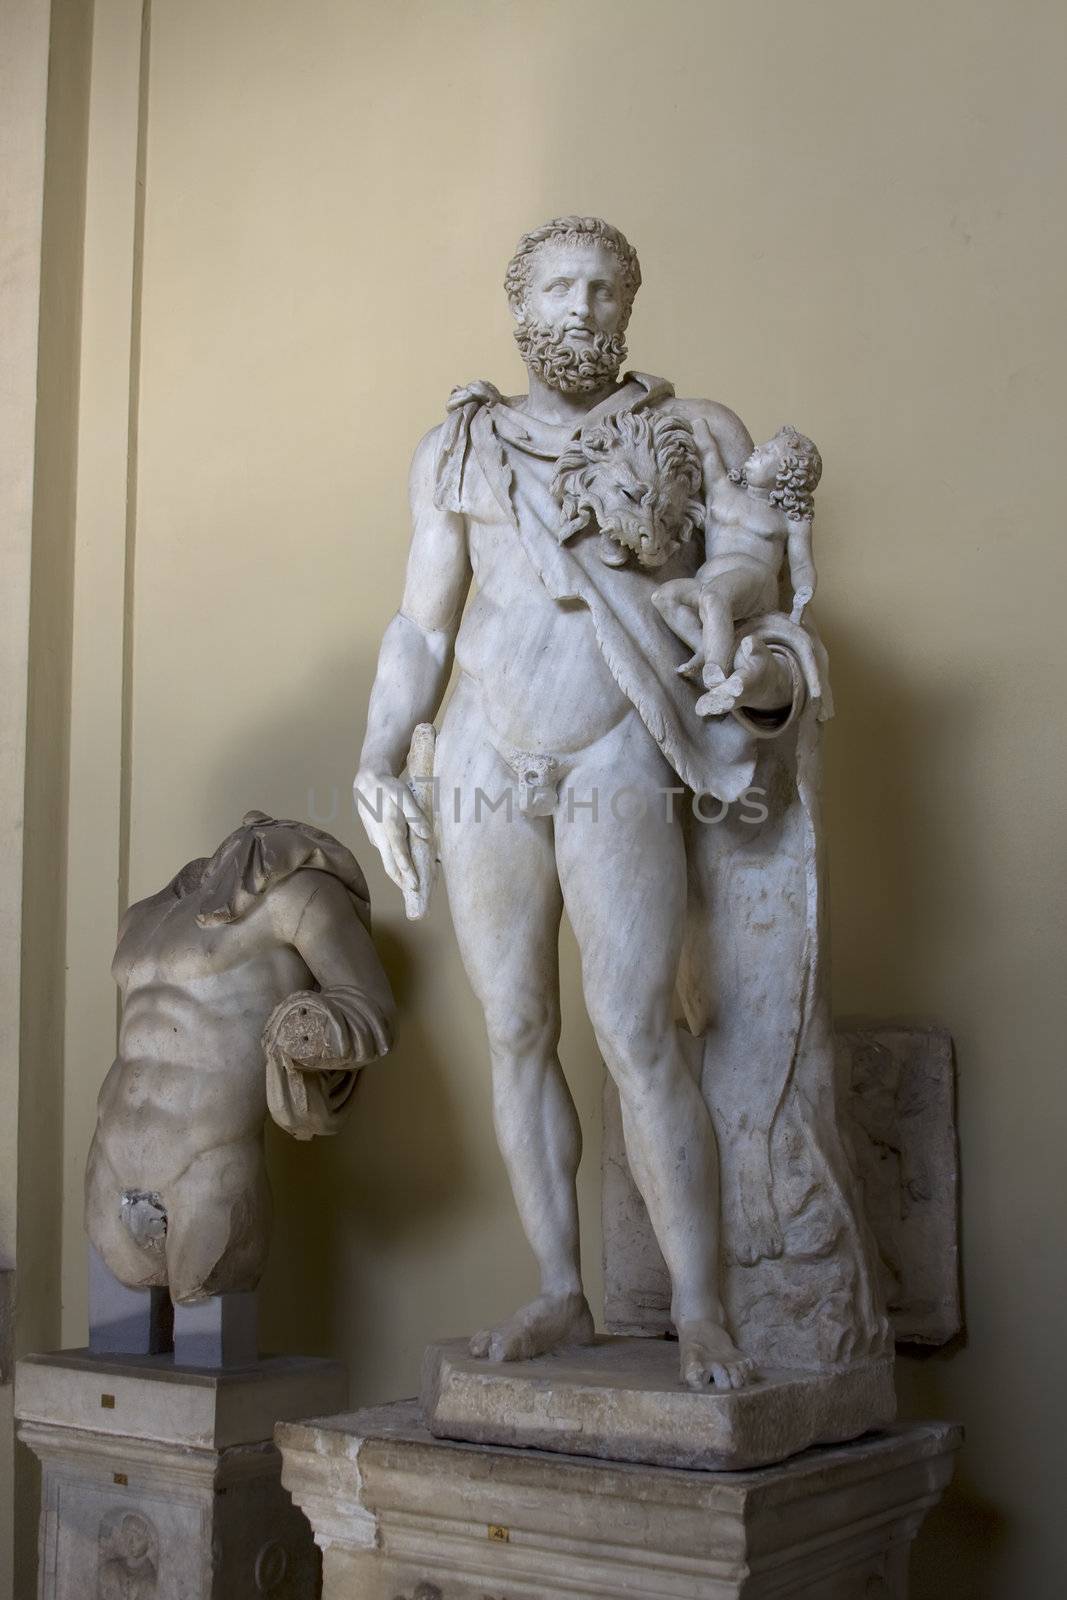 Antique statue in Vatican of ancient naked man